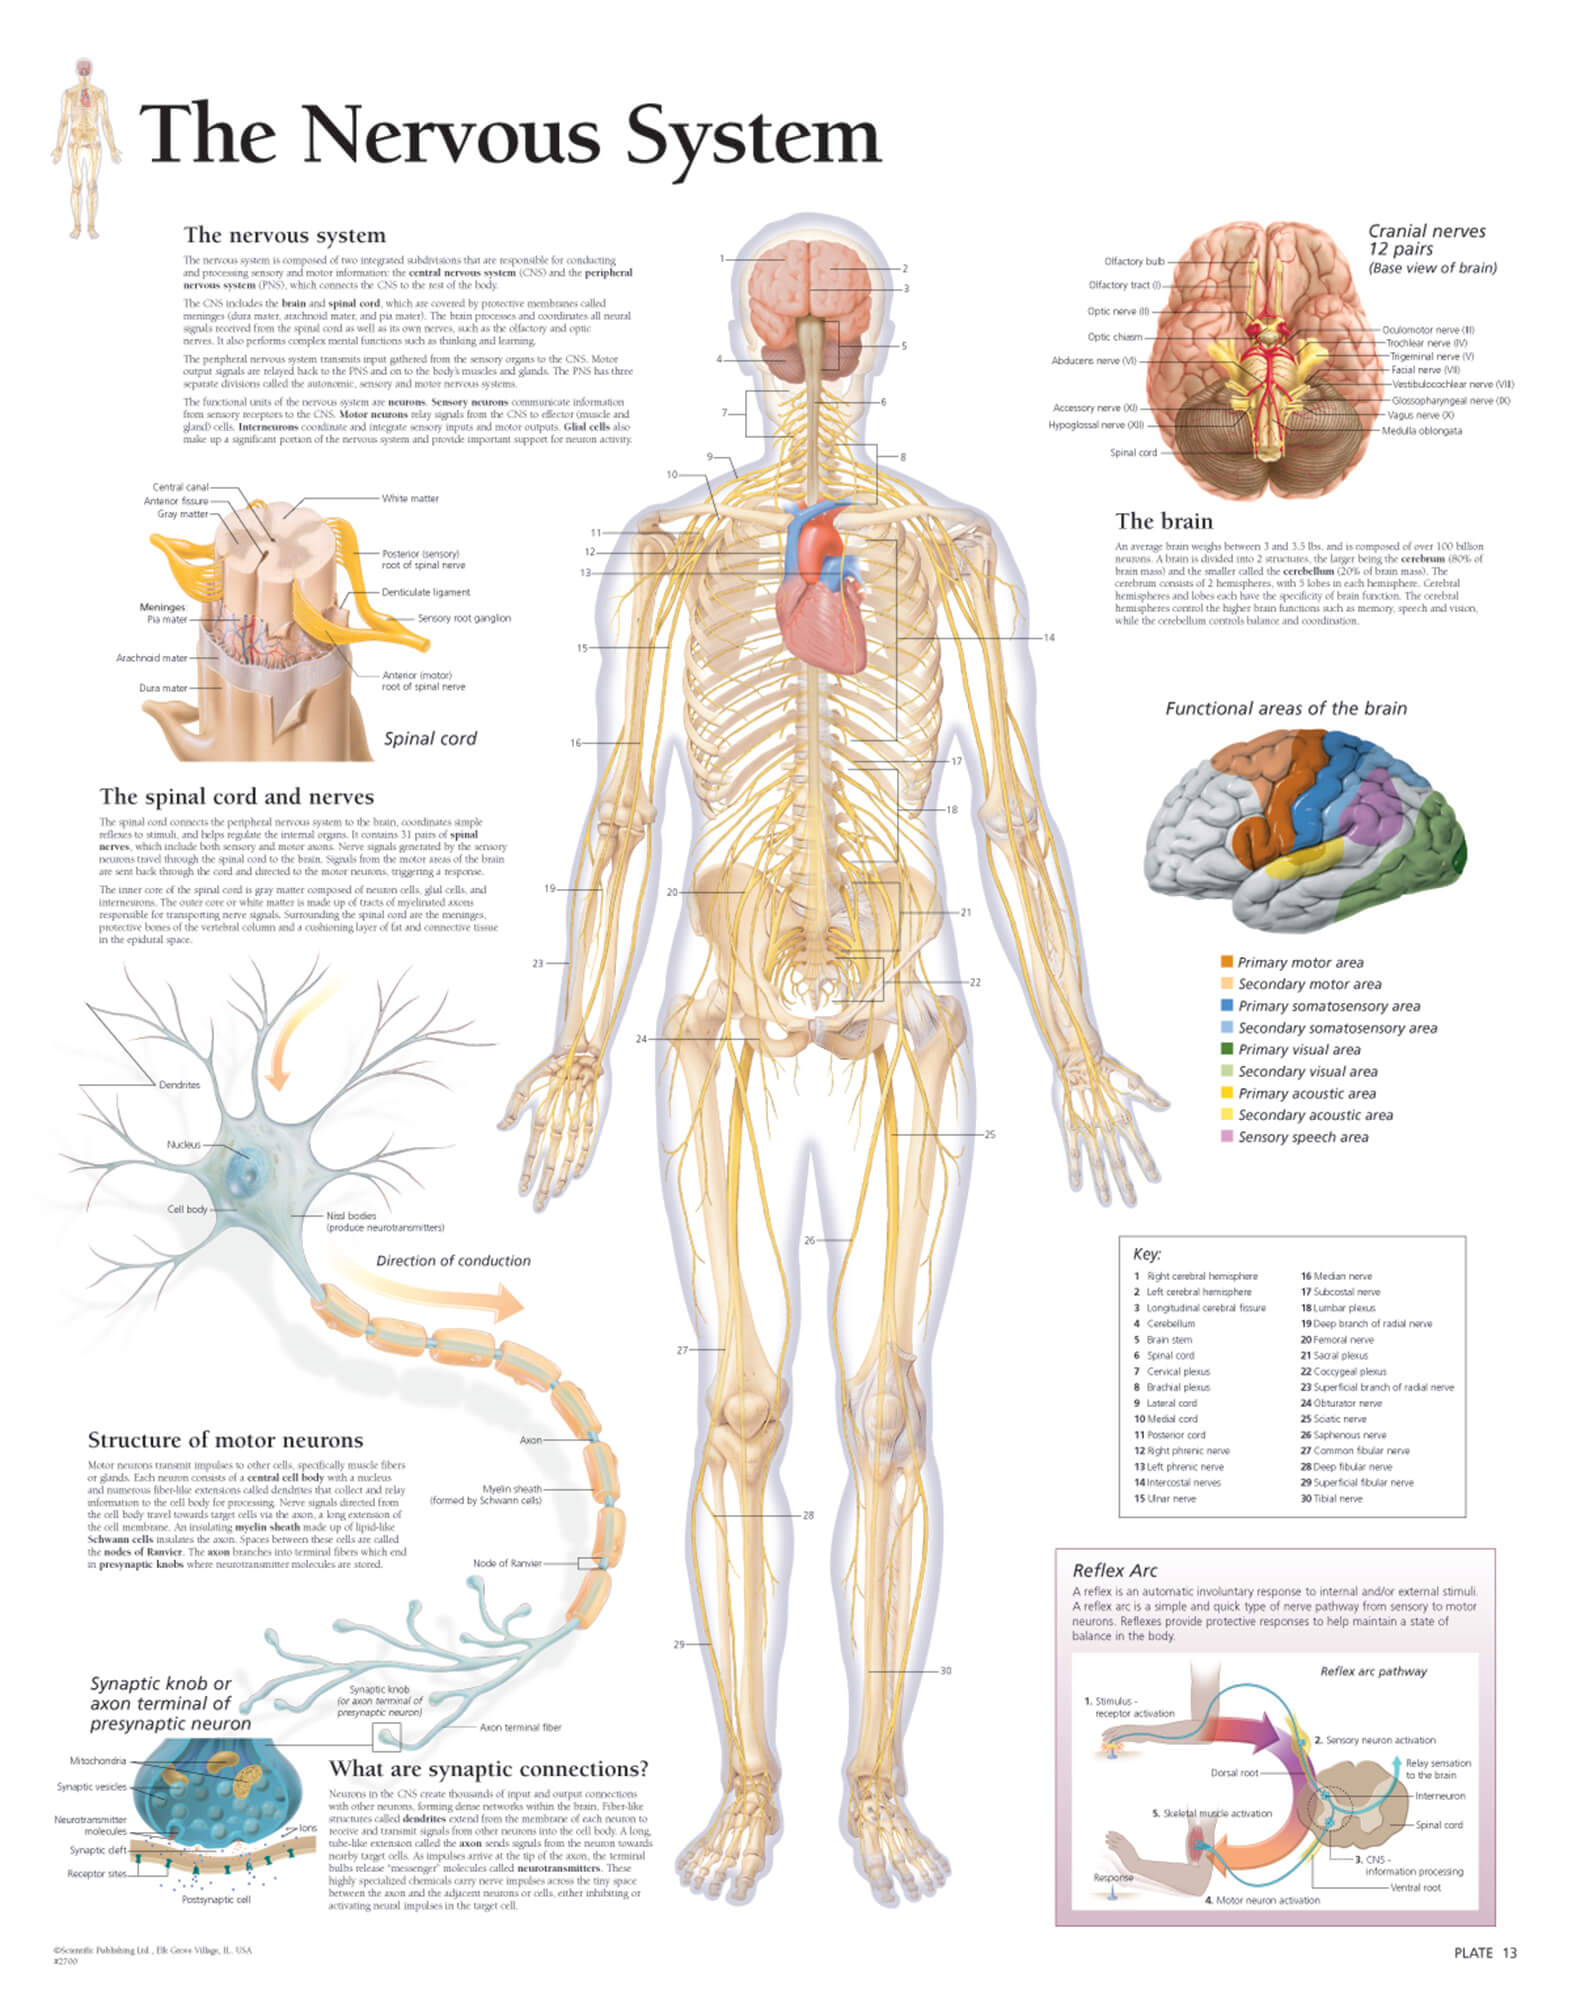 Interactive Guide to the Nervous System